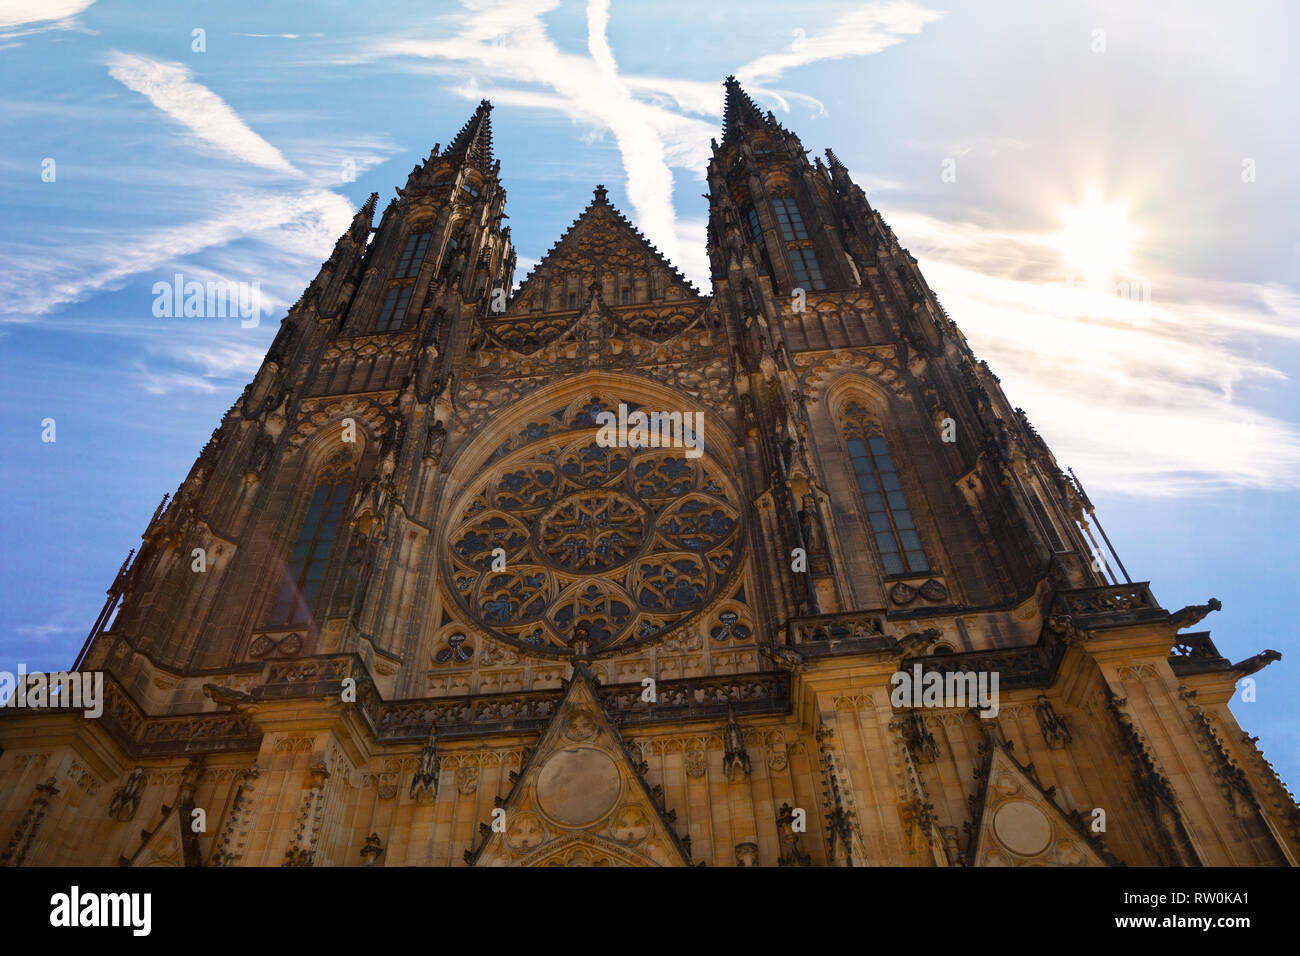 Famous St. Vitus Cathedral in Prague, Czech Republic. Stock Photo